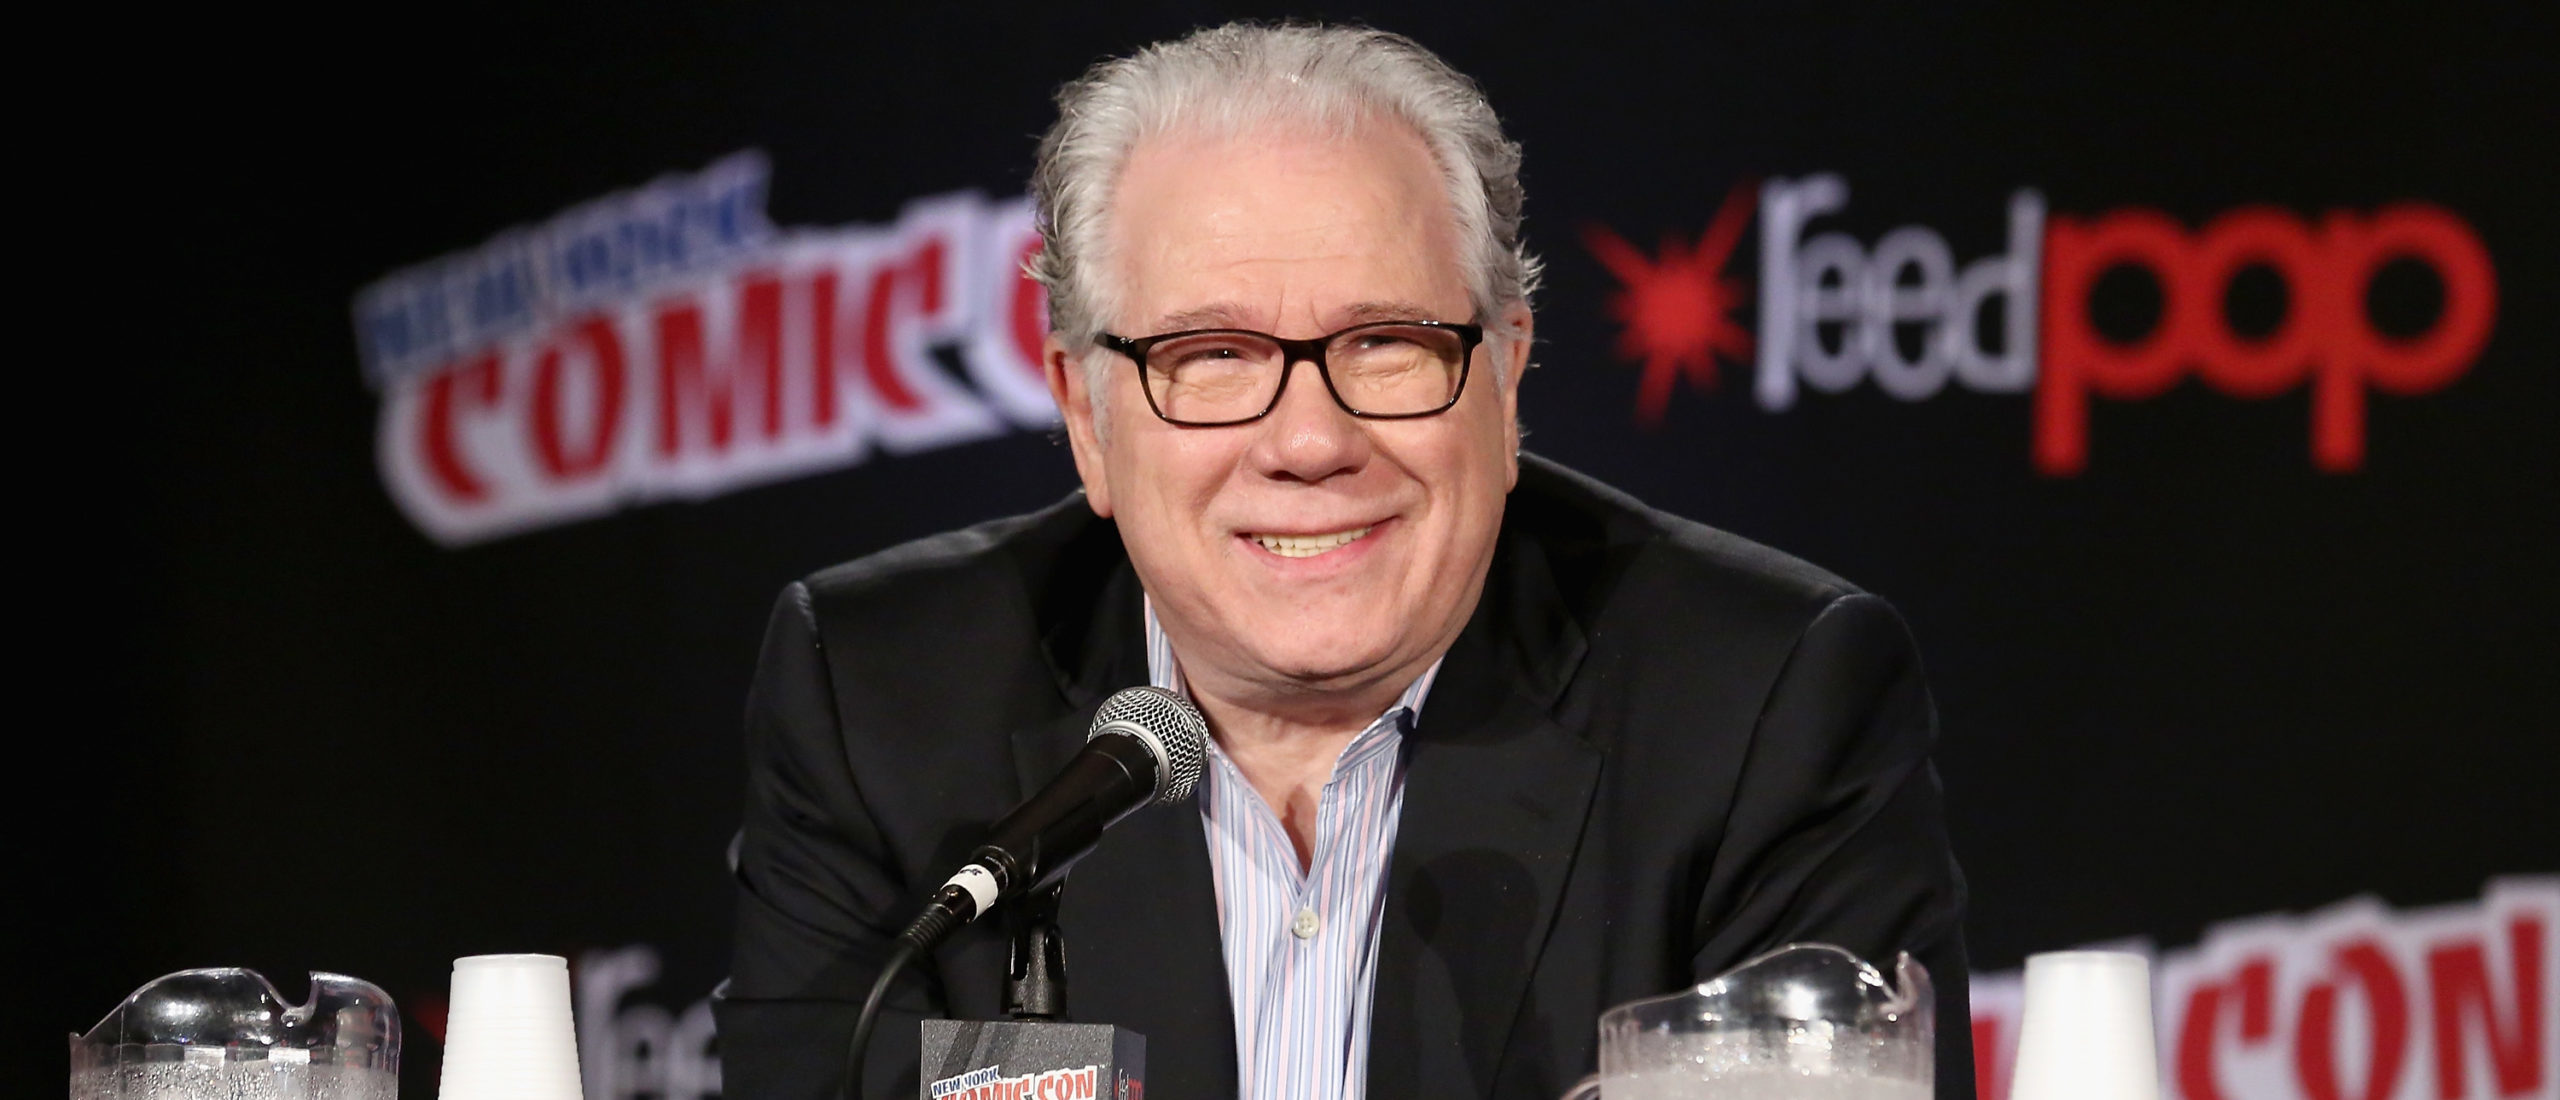 NEW YORK, NY - OCTOBER 09: Actor John Larroquette speaks at The Librarian - S2 First Look panel at the Jacob Javits Center on October 9, 2015 in New York, United States. 25749_001_090.JPG (Photo by Paul Zimmerman/Getty Images For Turner)